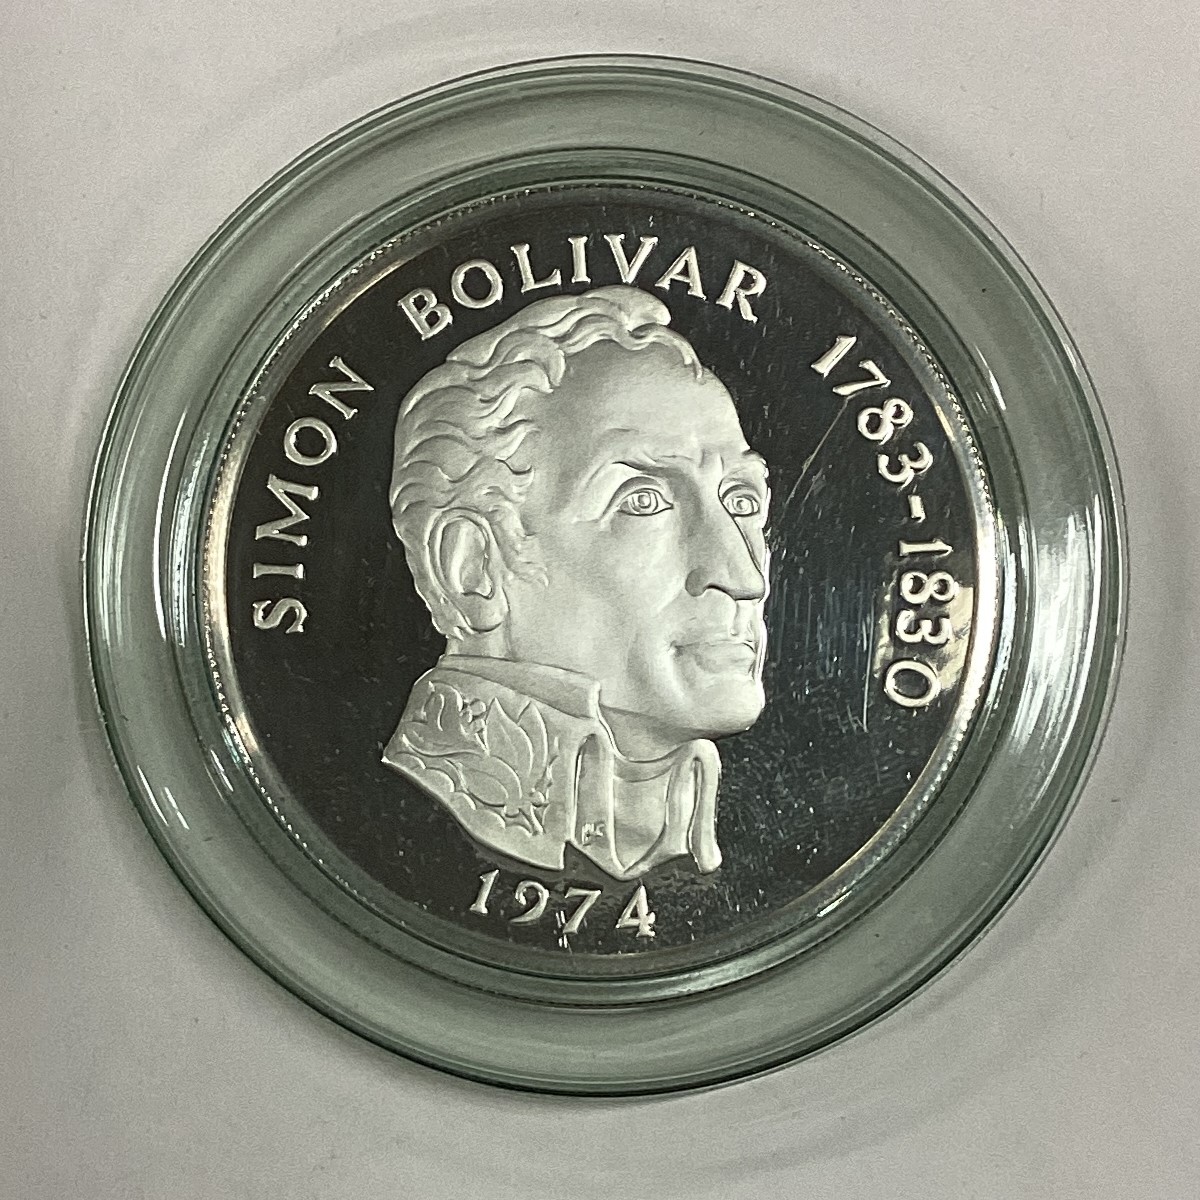 A 1974 Panama 20 Balboas Proof silver coin. - Image 2 of 3